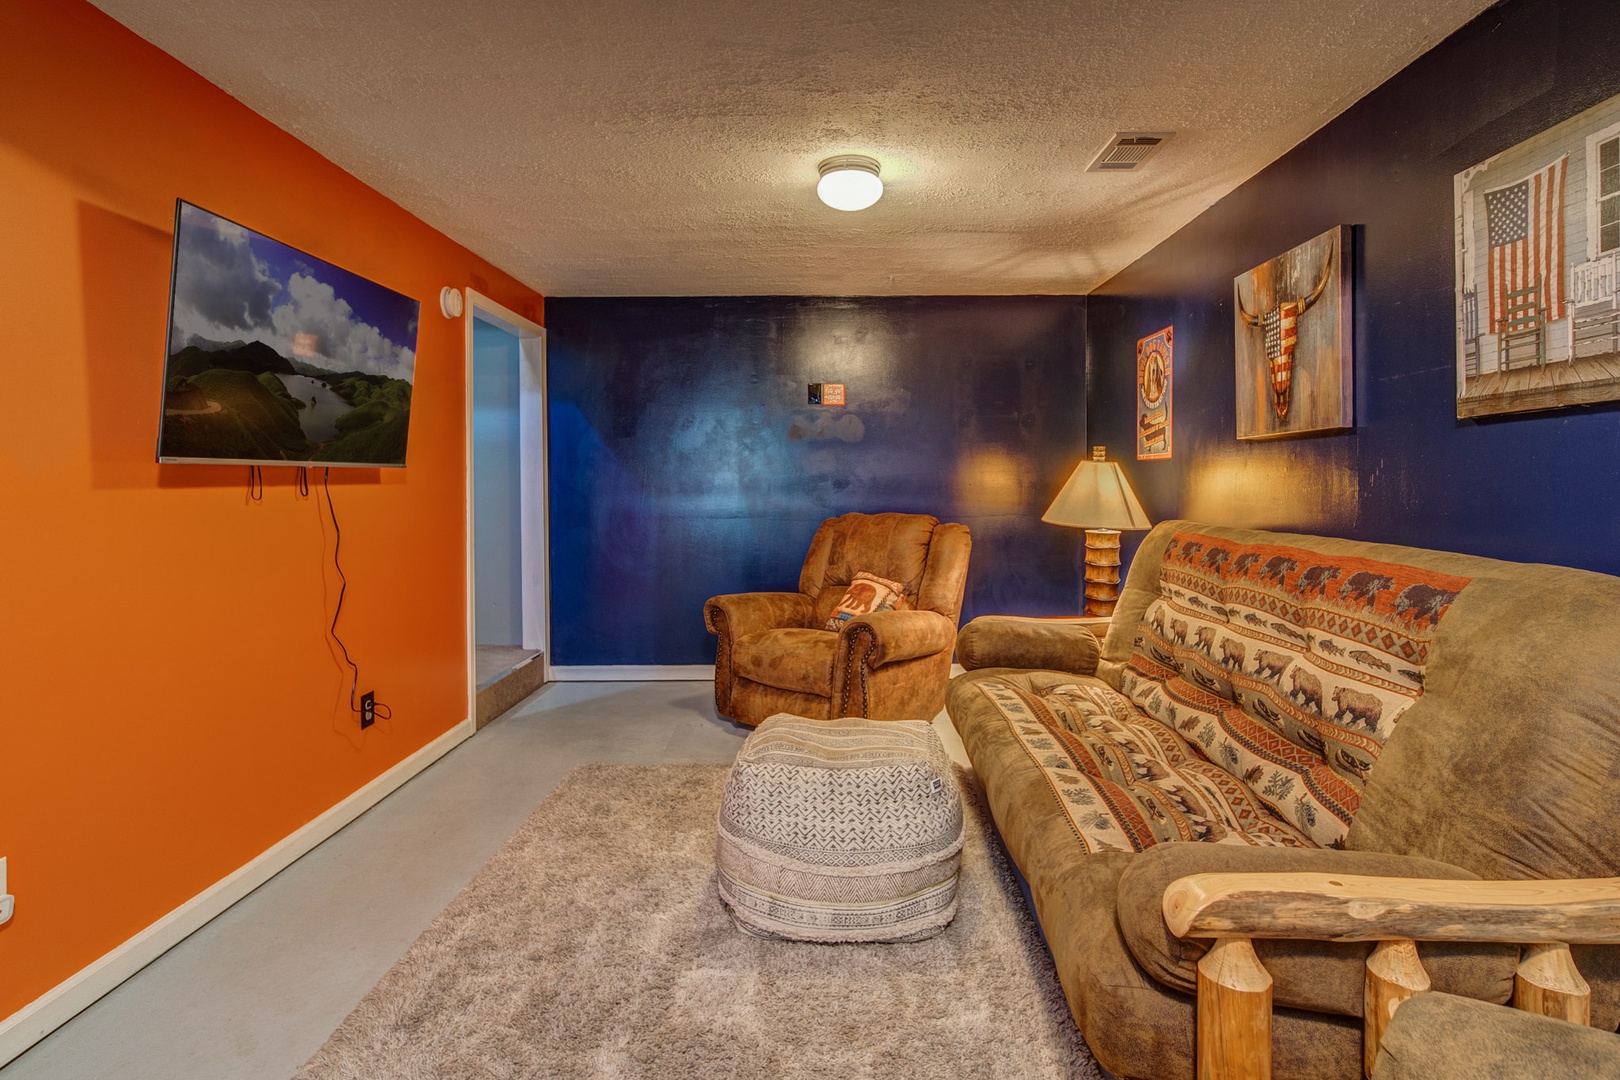 Bring your gaming console and enjoy the basement level living or movie room